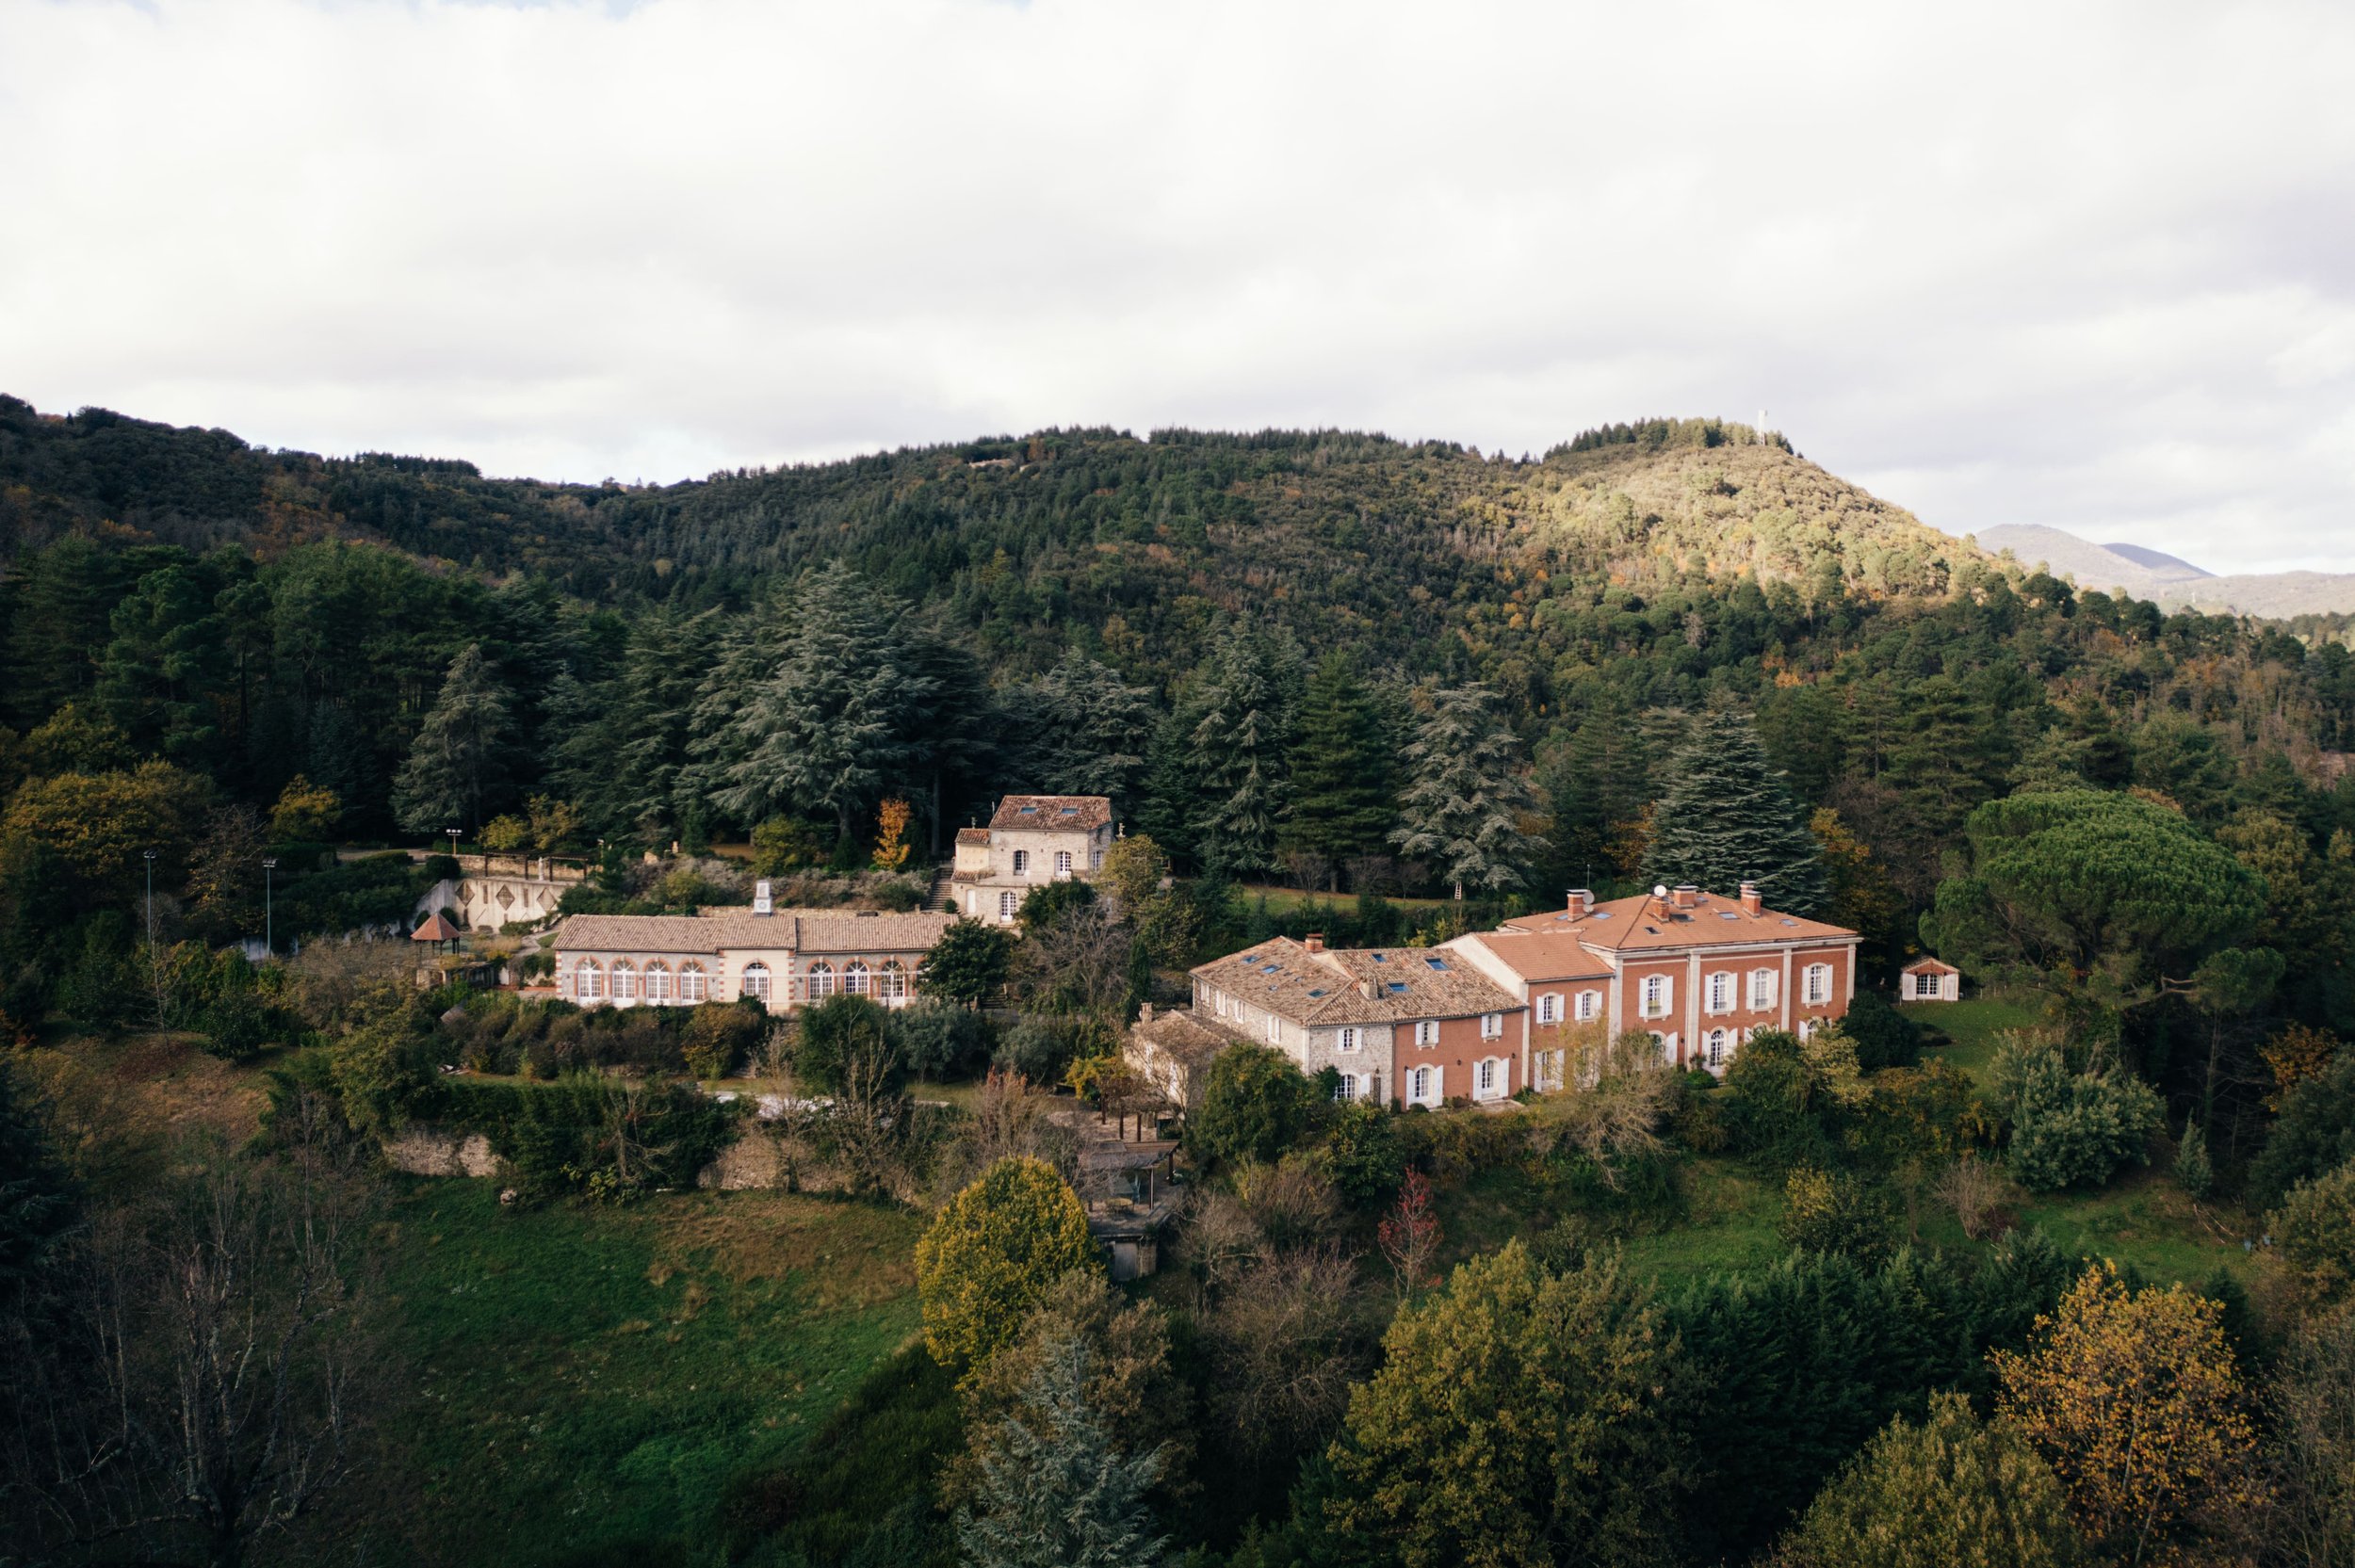 Francis York 99-Acre Country Estate in Cévennes National Park, Southern France 10.jpg